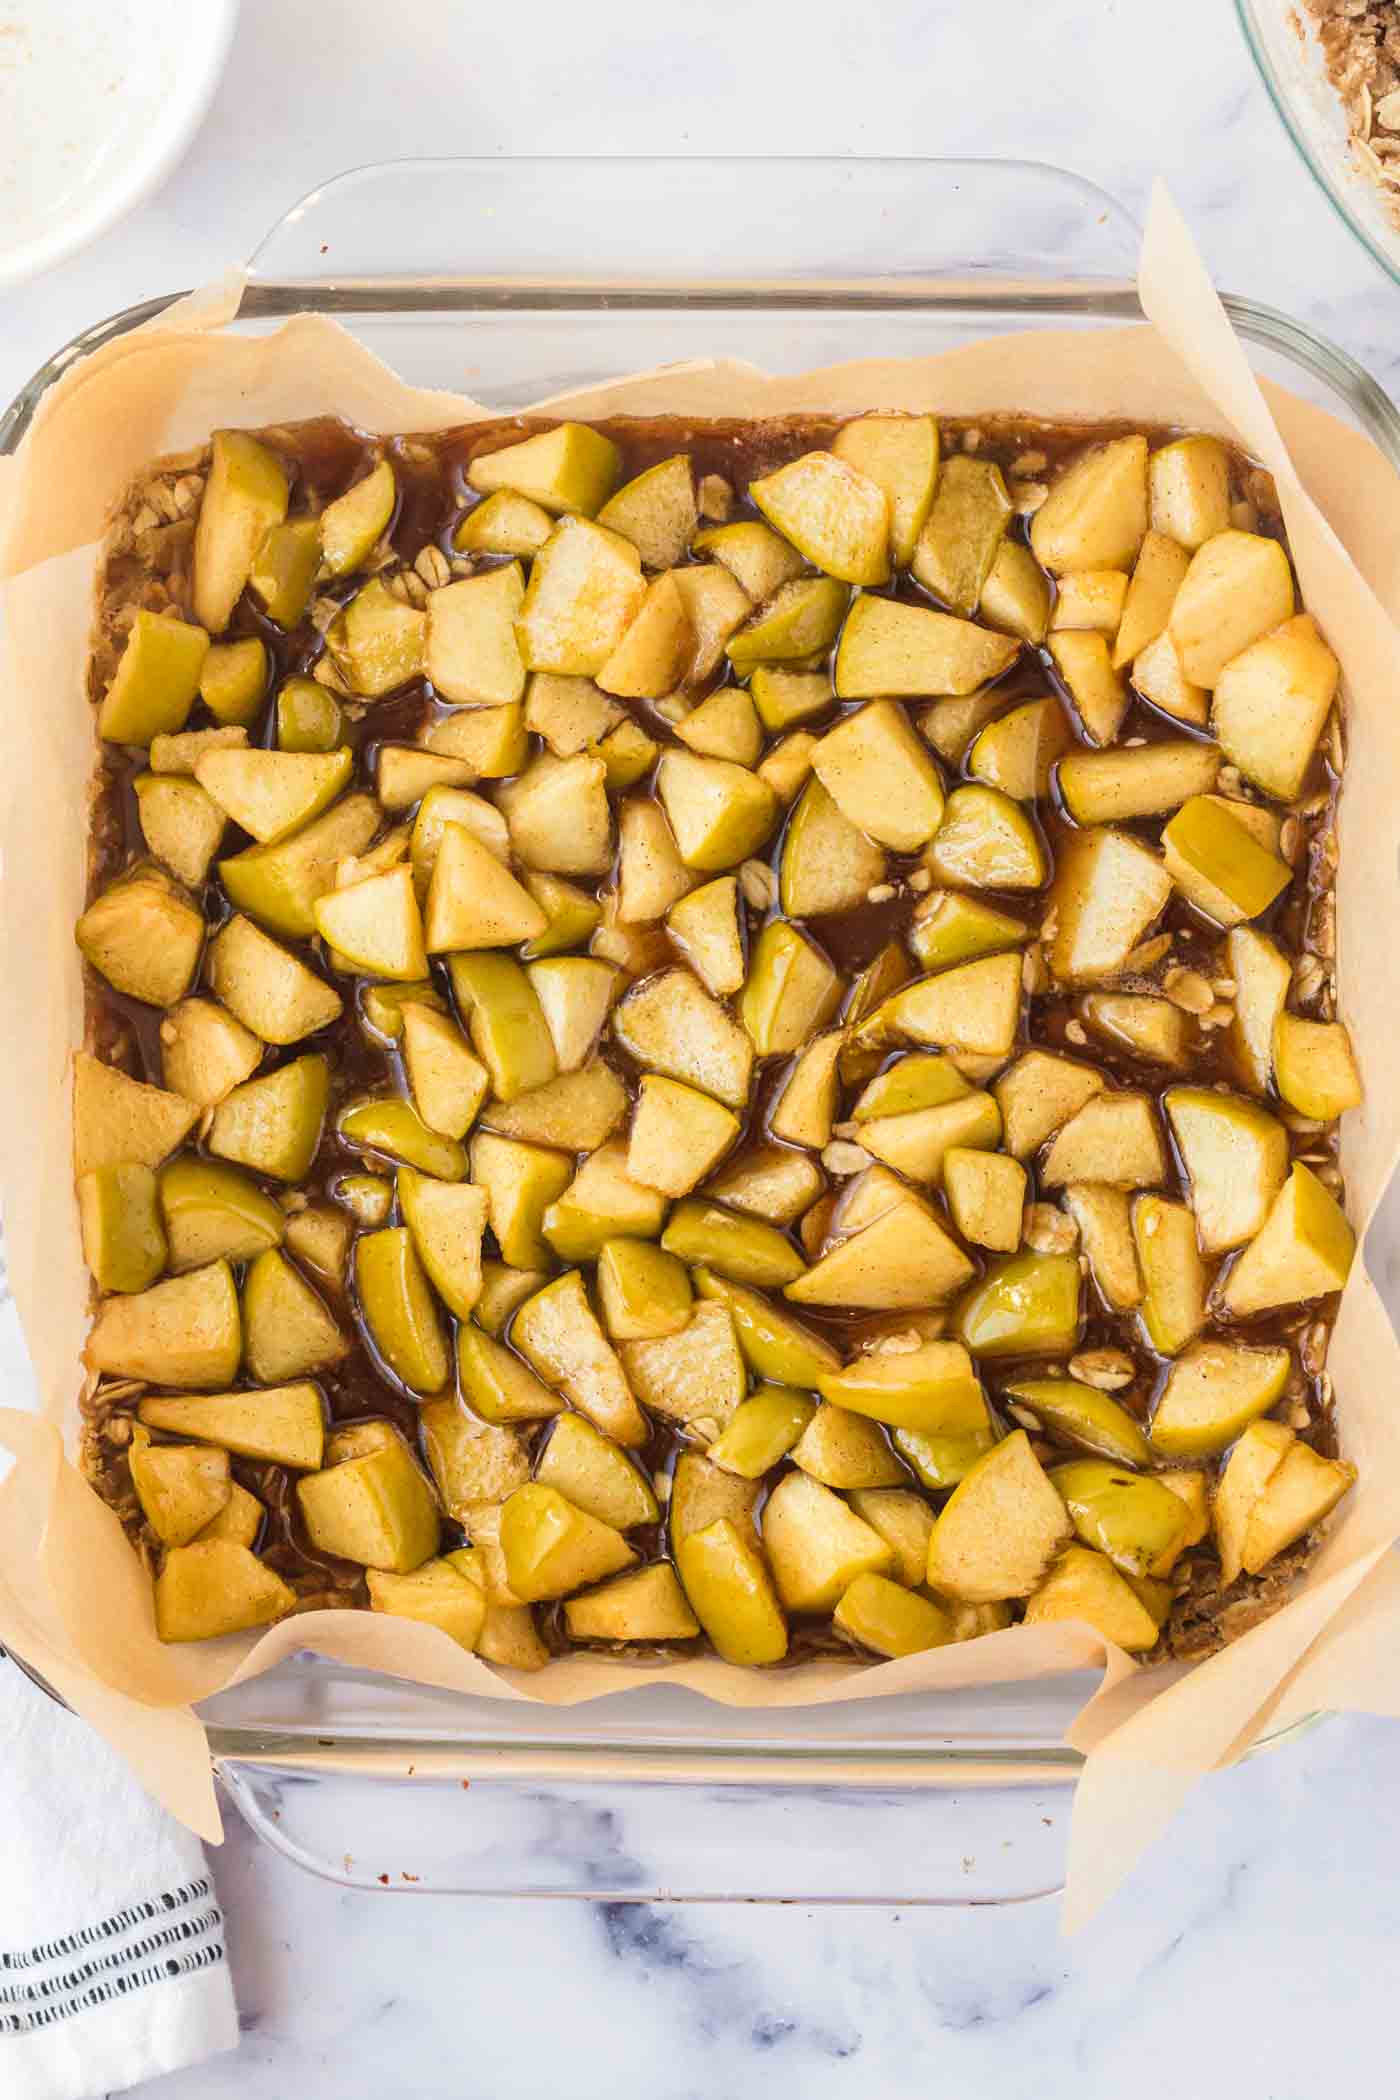 Overhead view into a square glass baking dish filled with diced apples and lined with parchment paper.